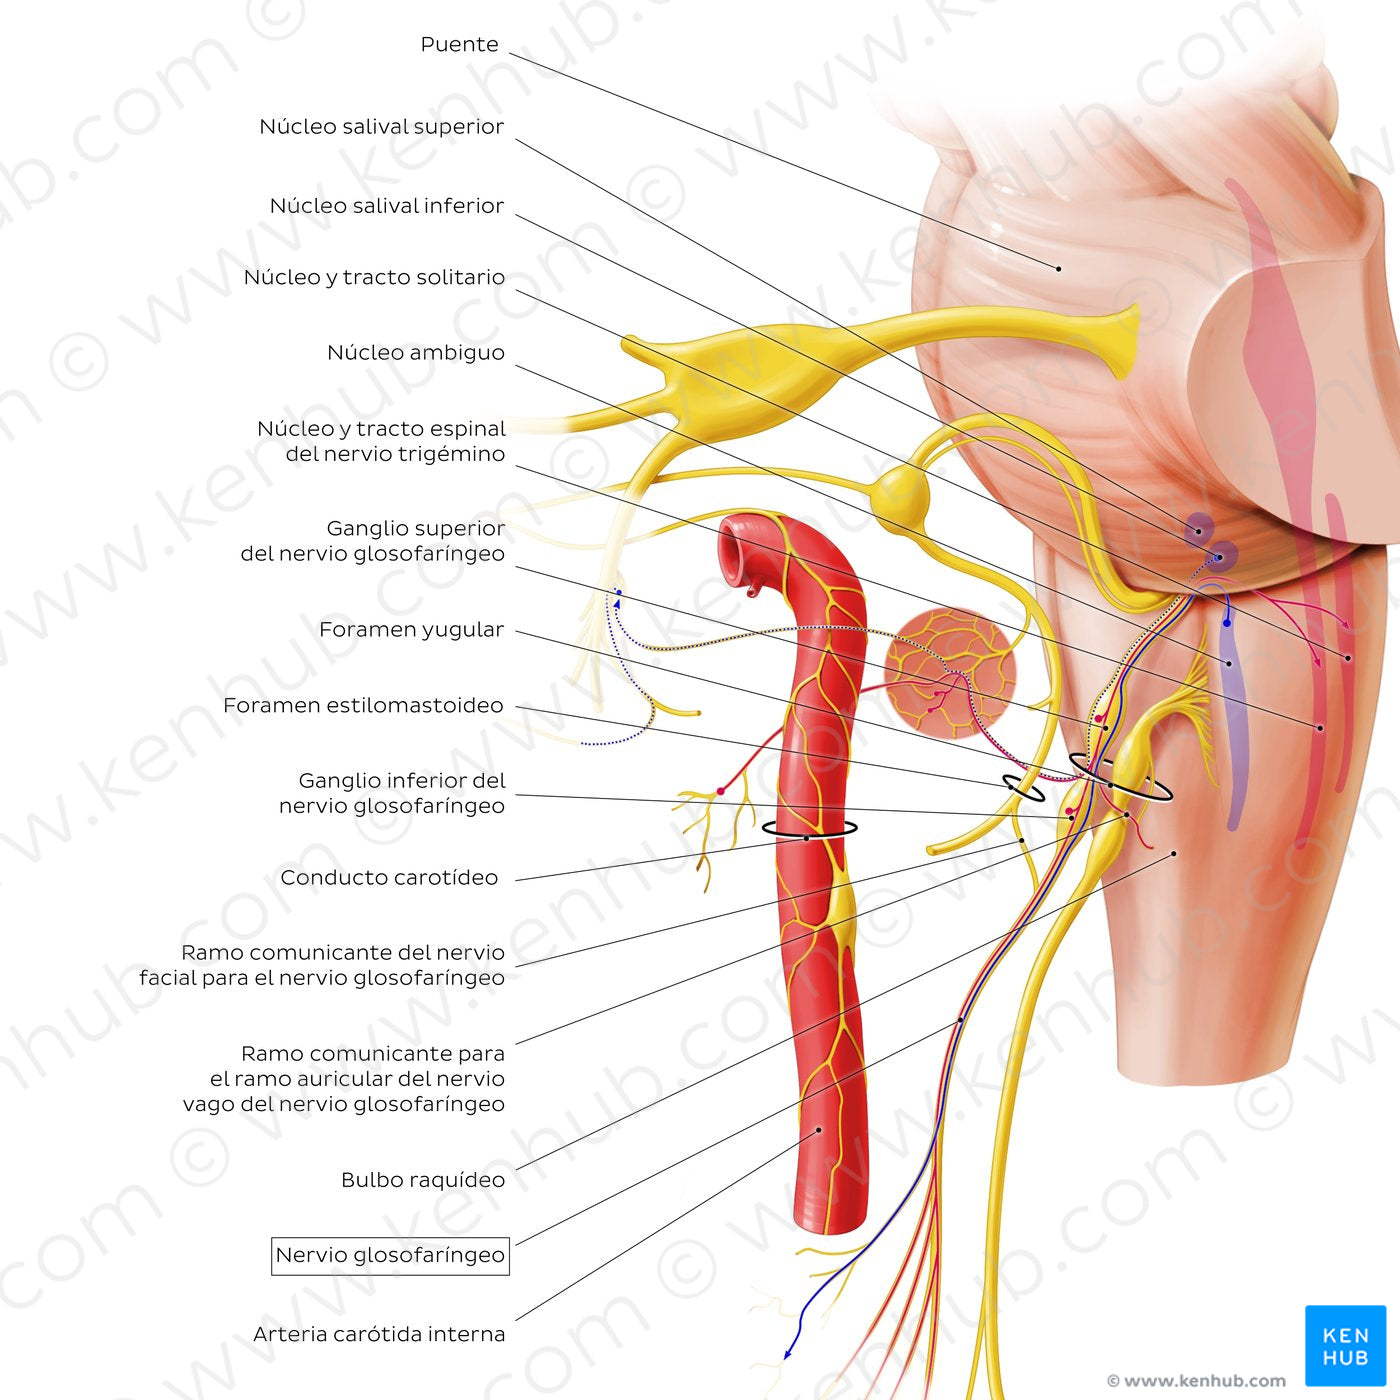 Glossopharyngeal nerve (origin and proximal branches) (Spanish)